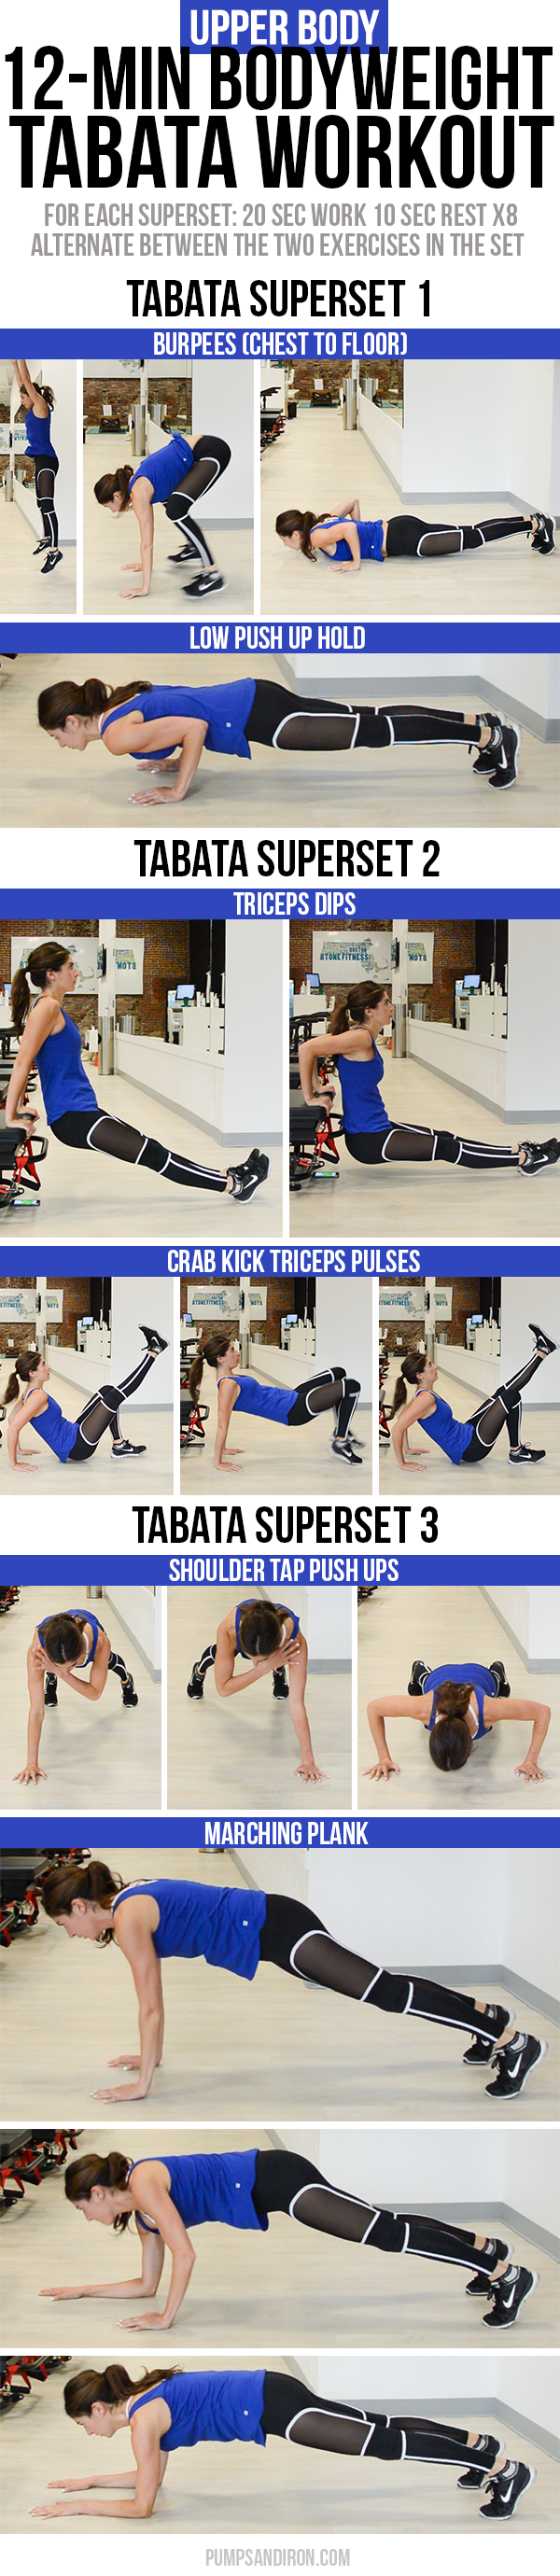 12-Minute Bodyweight Tabata Workout Series: Upper Body (Chest